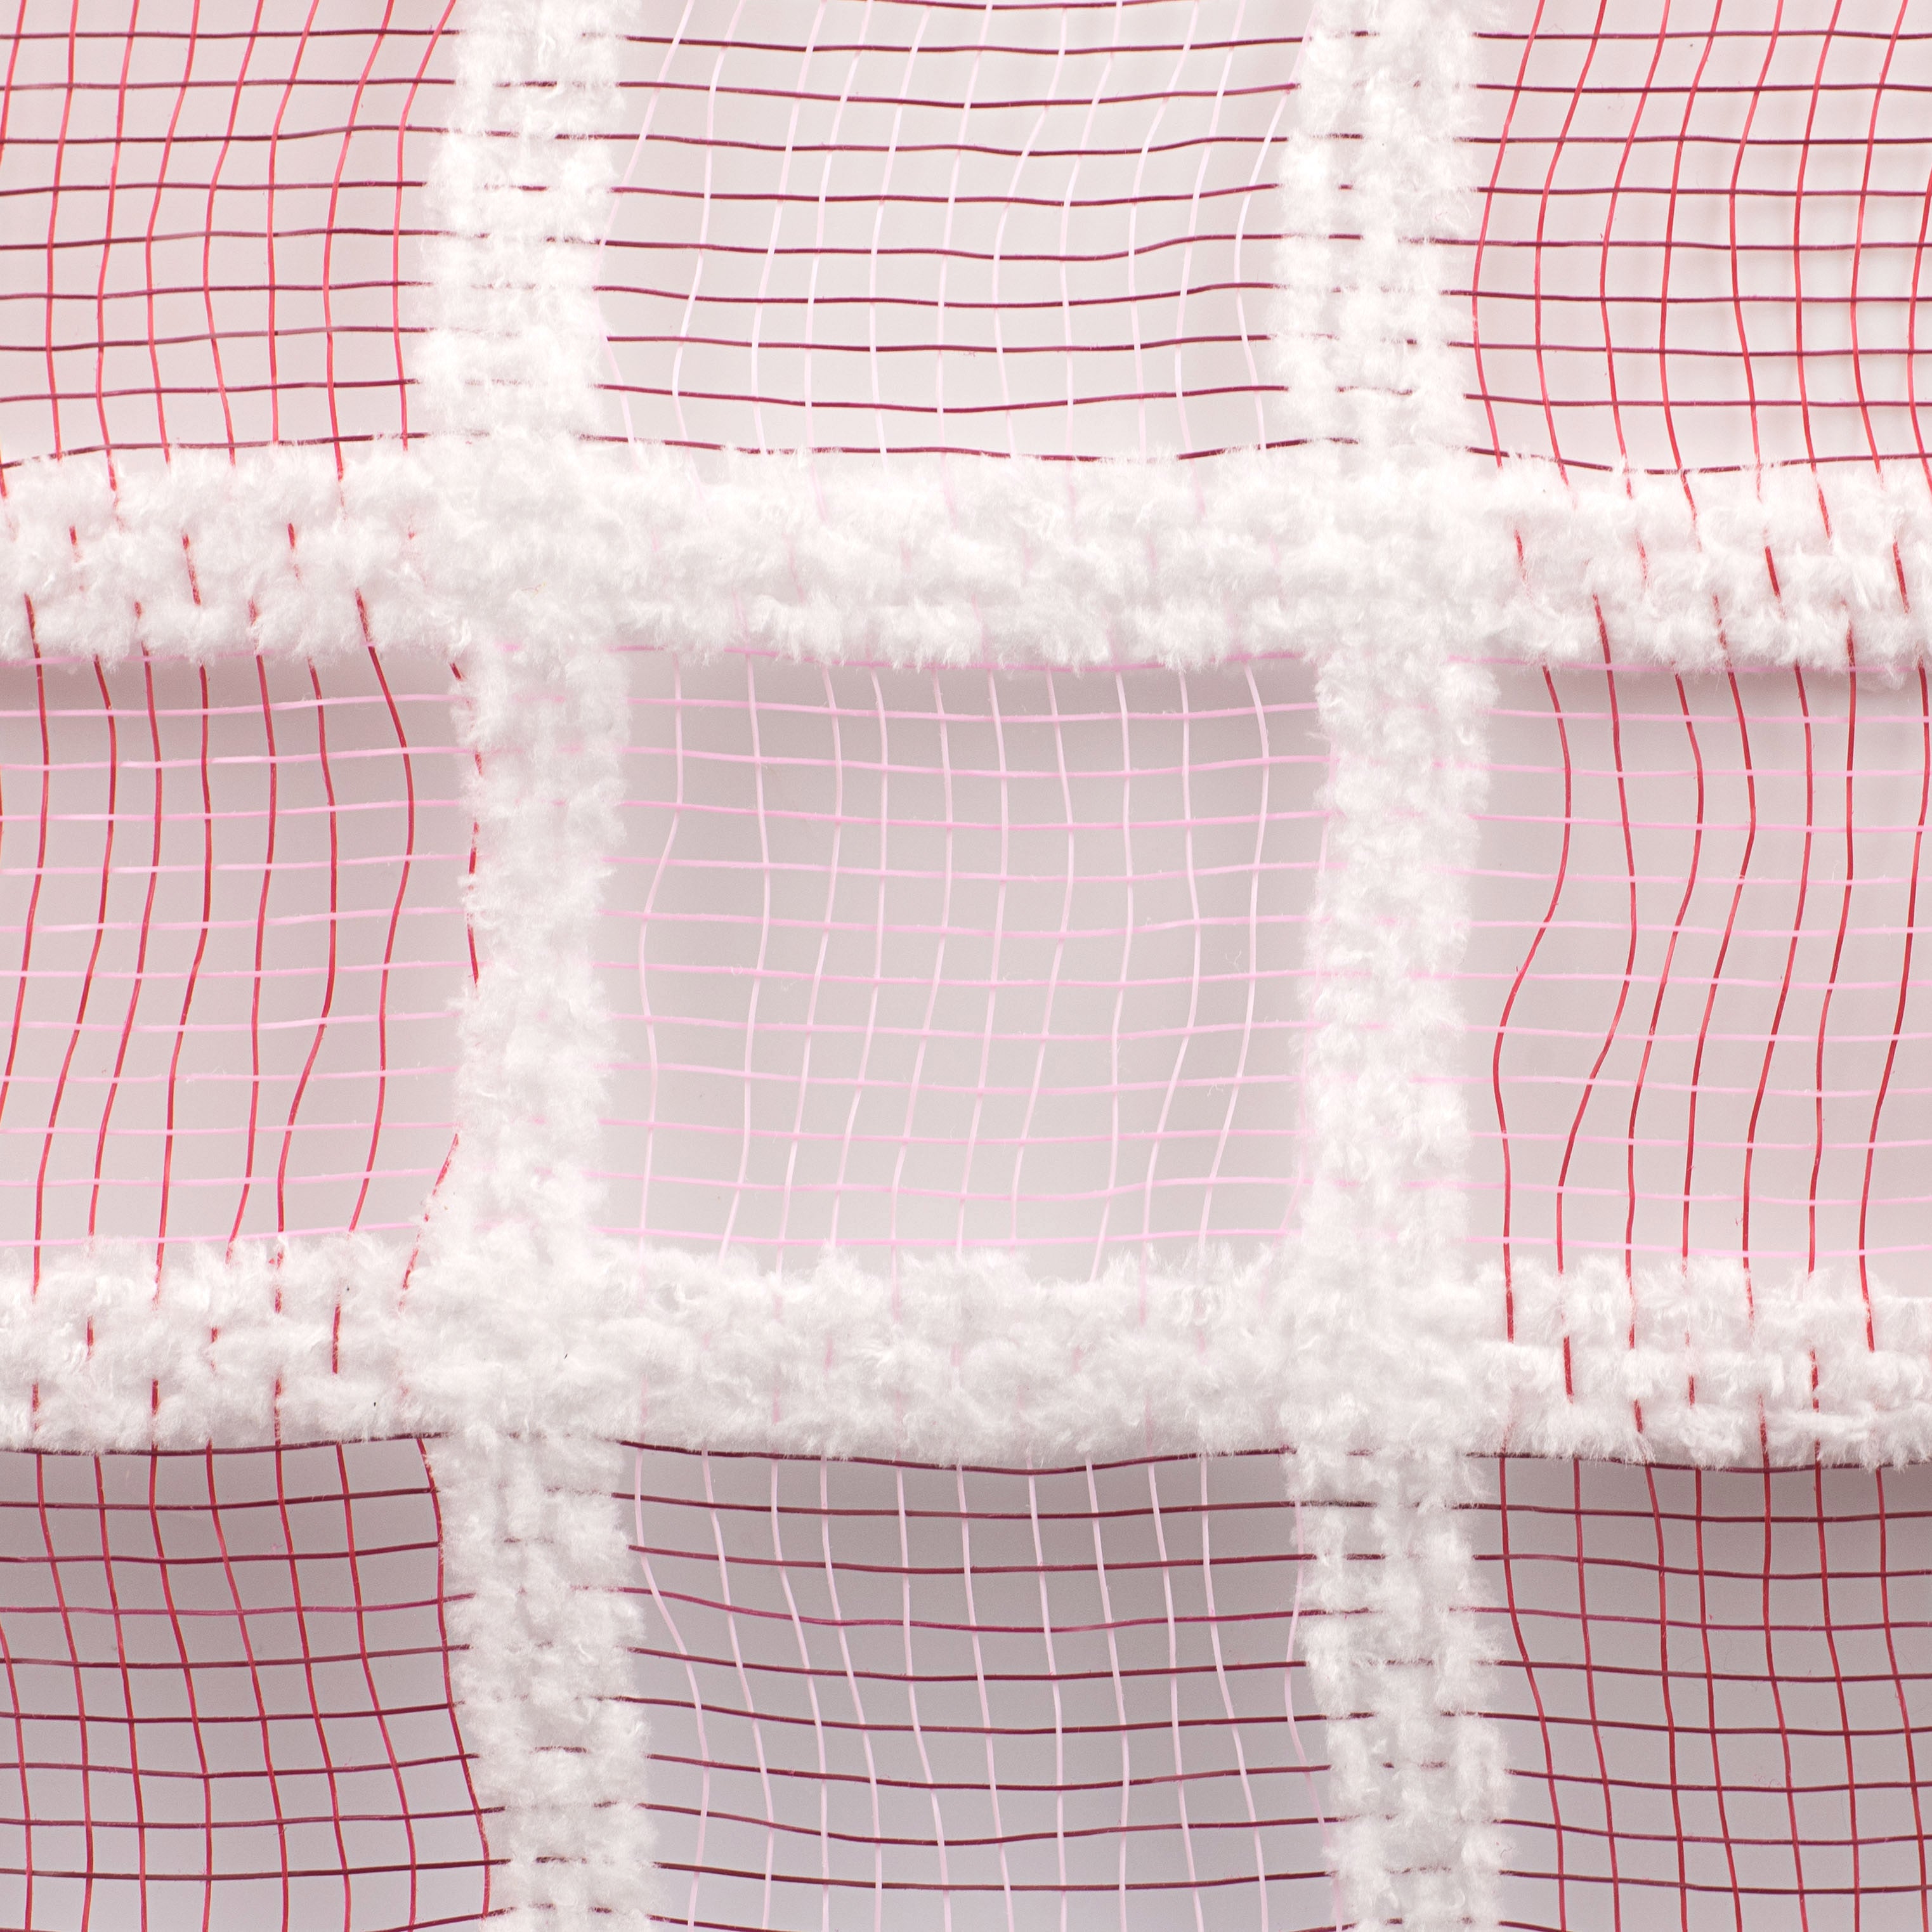 10" Fuzzy Check Mesh: Red, Pink & White